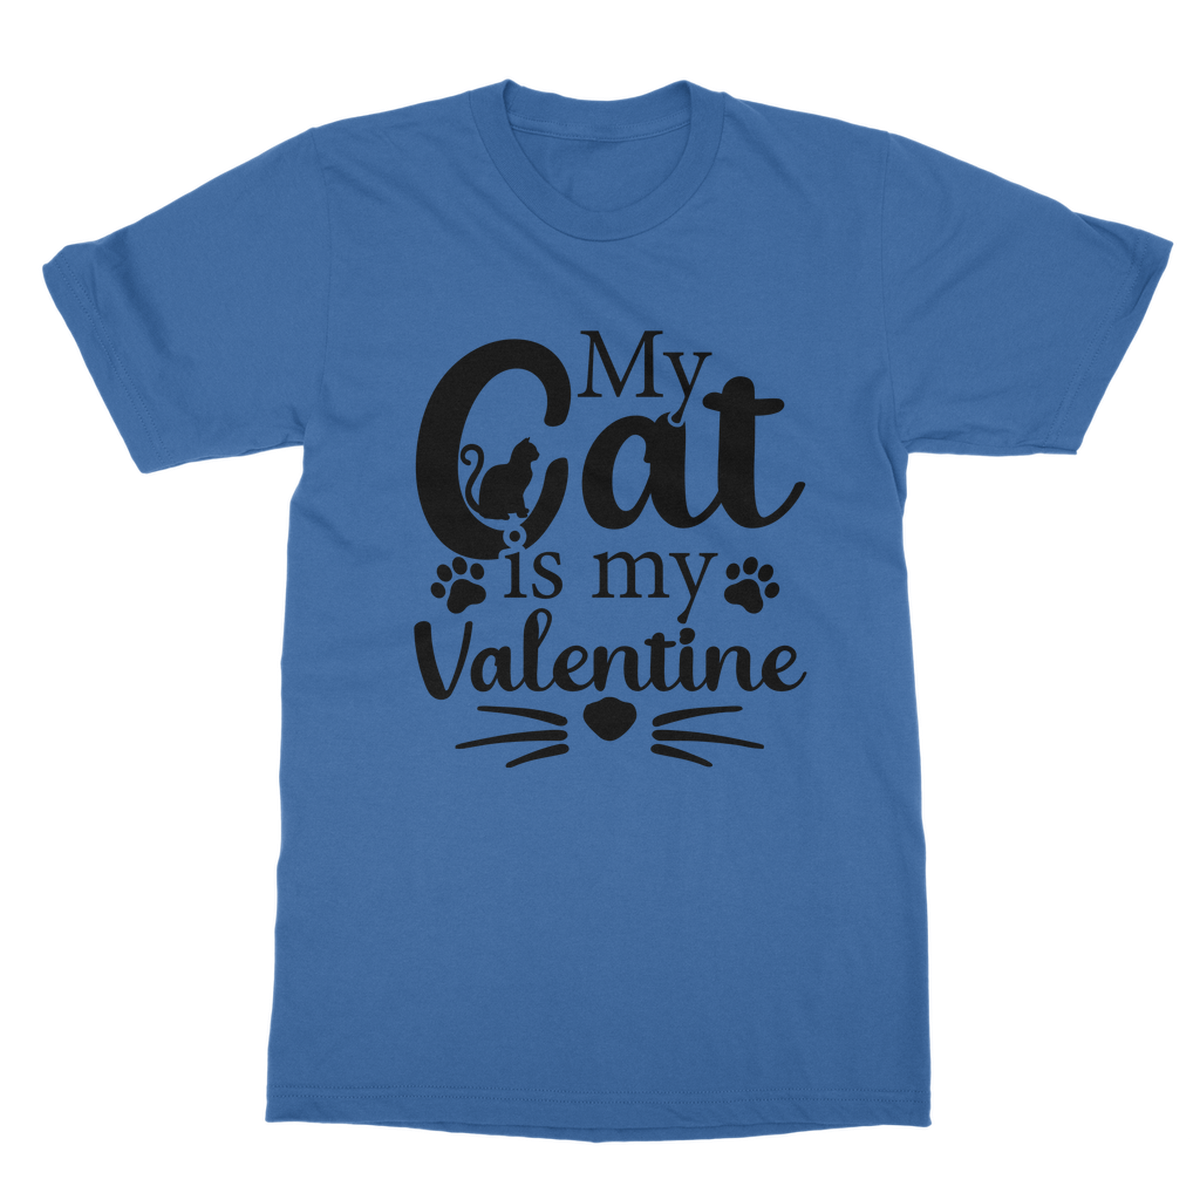 My Cat is my Valentine Adult T-Shirt